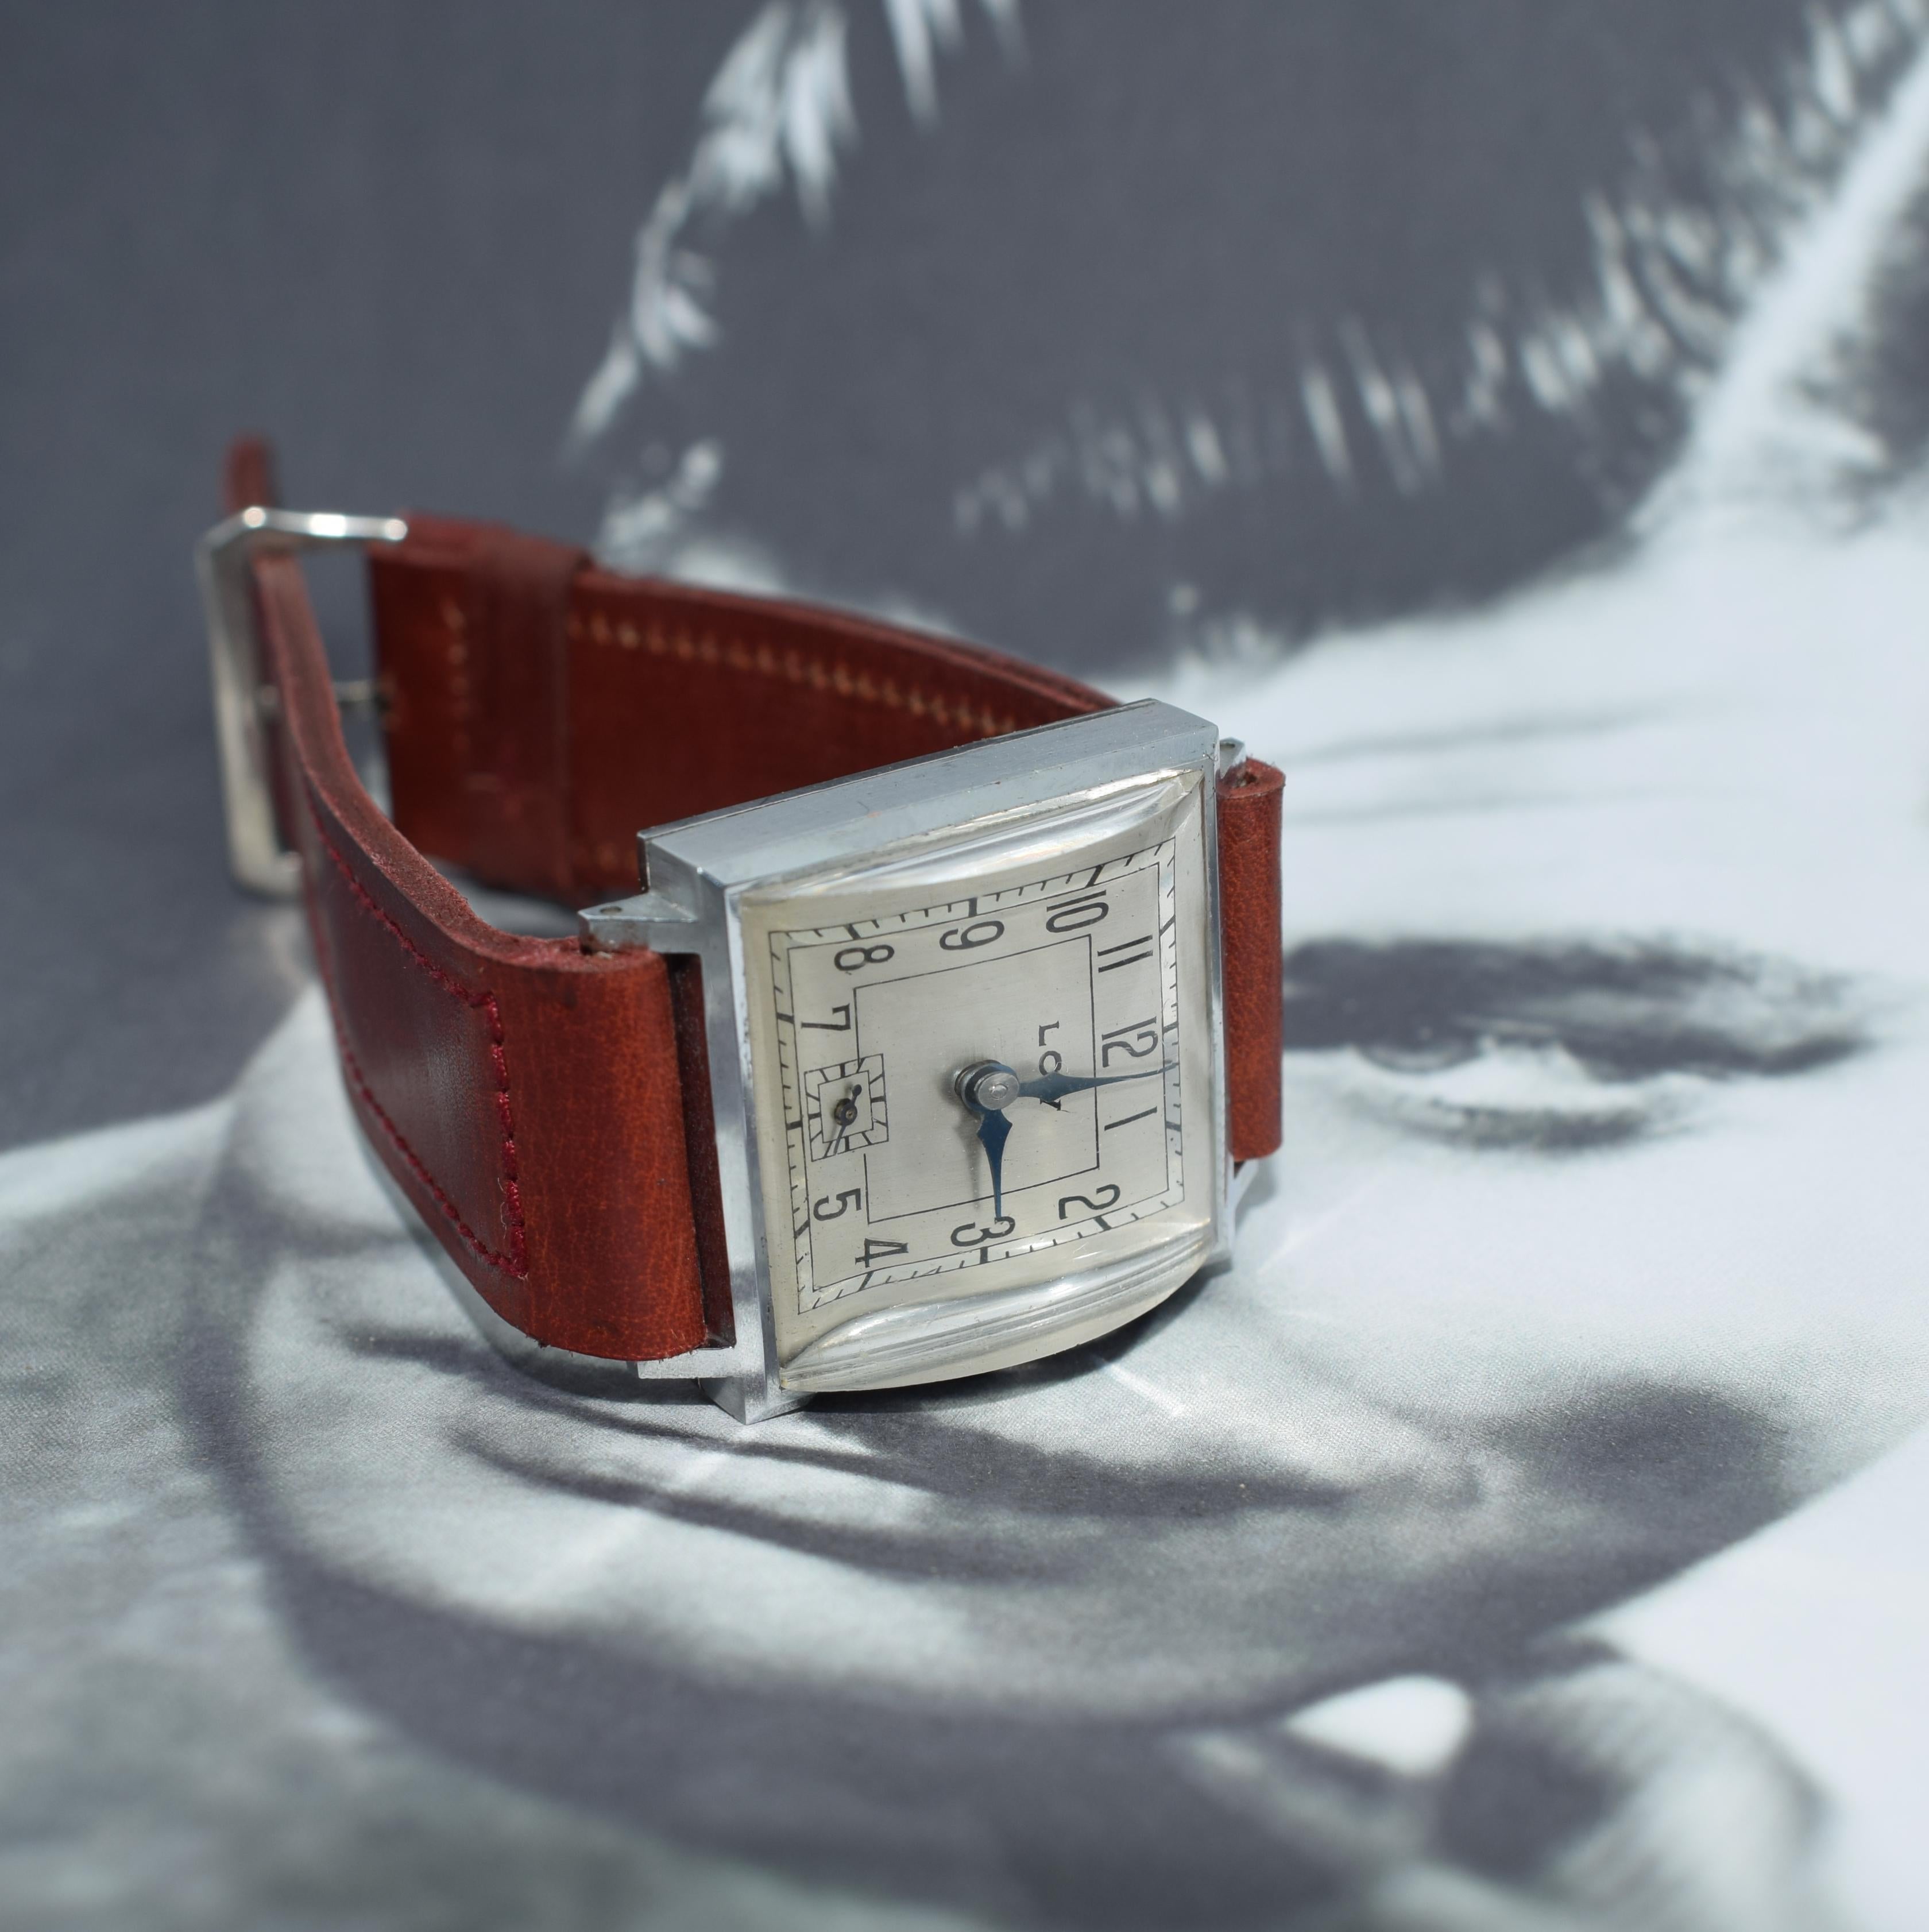 This is a golden opportunity to acquire a perfect condition Art Deco Gents wrist watch. This is what we call 'old new stock', that is to say it's of the period dating to the 1930's but has never been sold, marketed or worn, as you can imagine that's